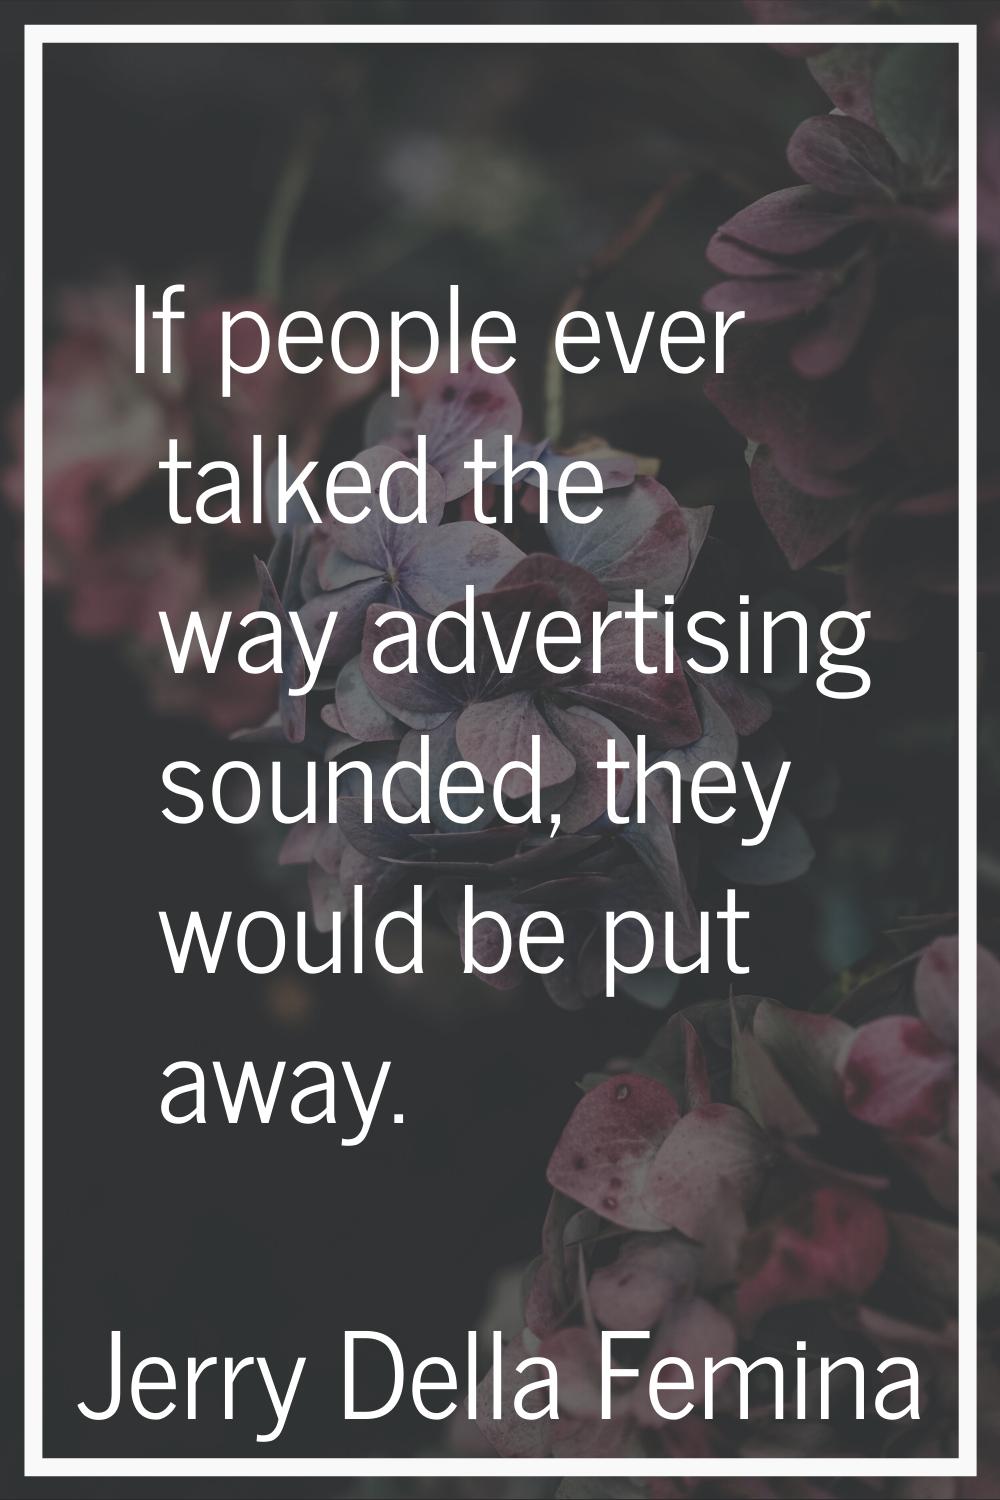 If people ever talked the way advertising sounded, they would be put away.